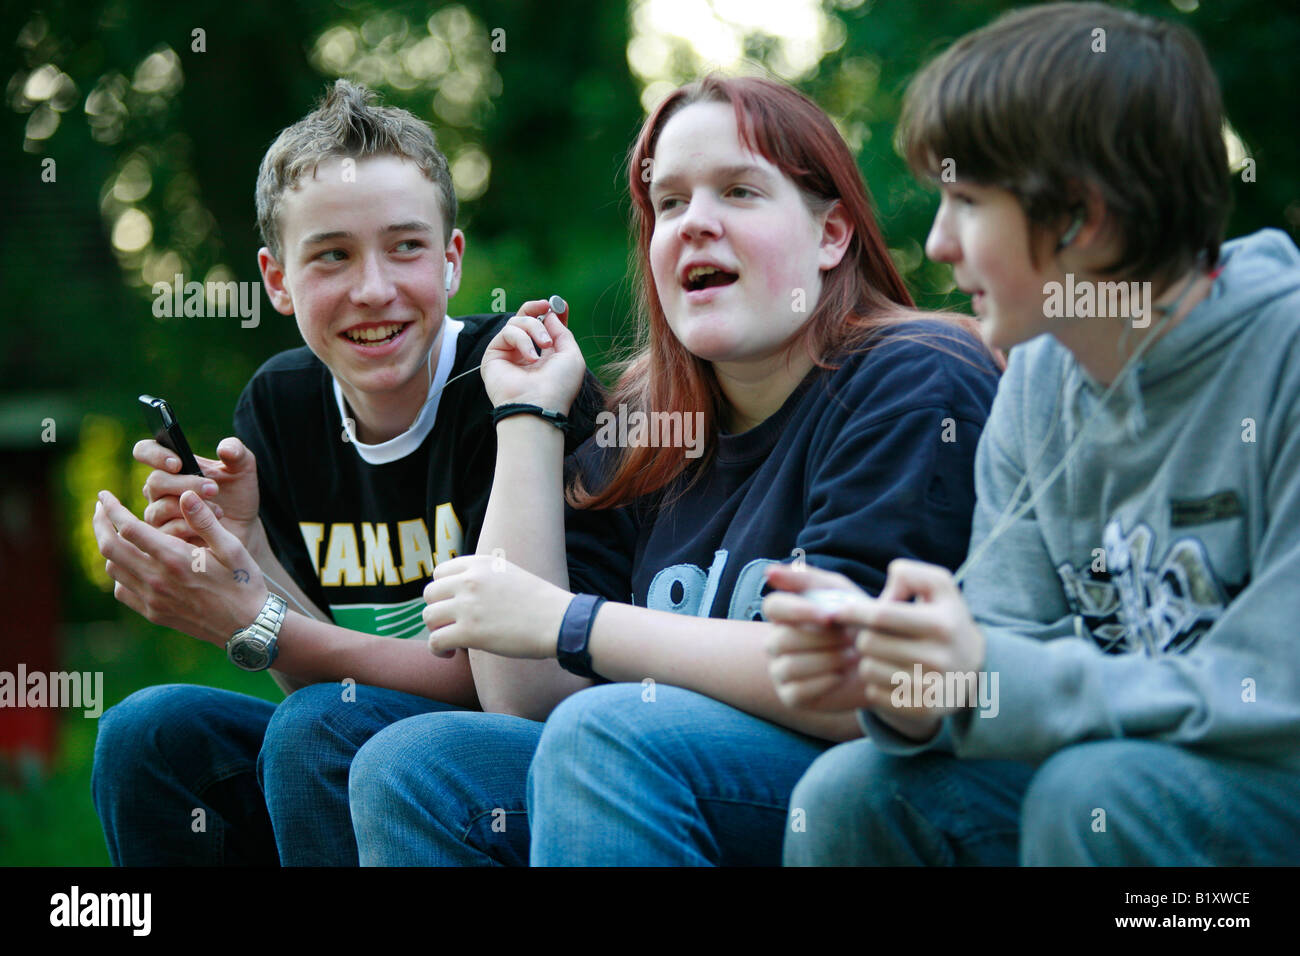 two boys and a girl listening to music together Stock Photo